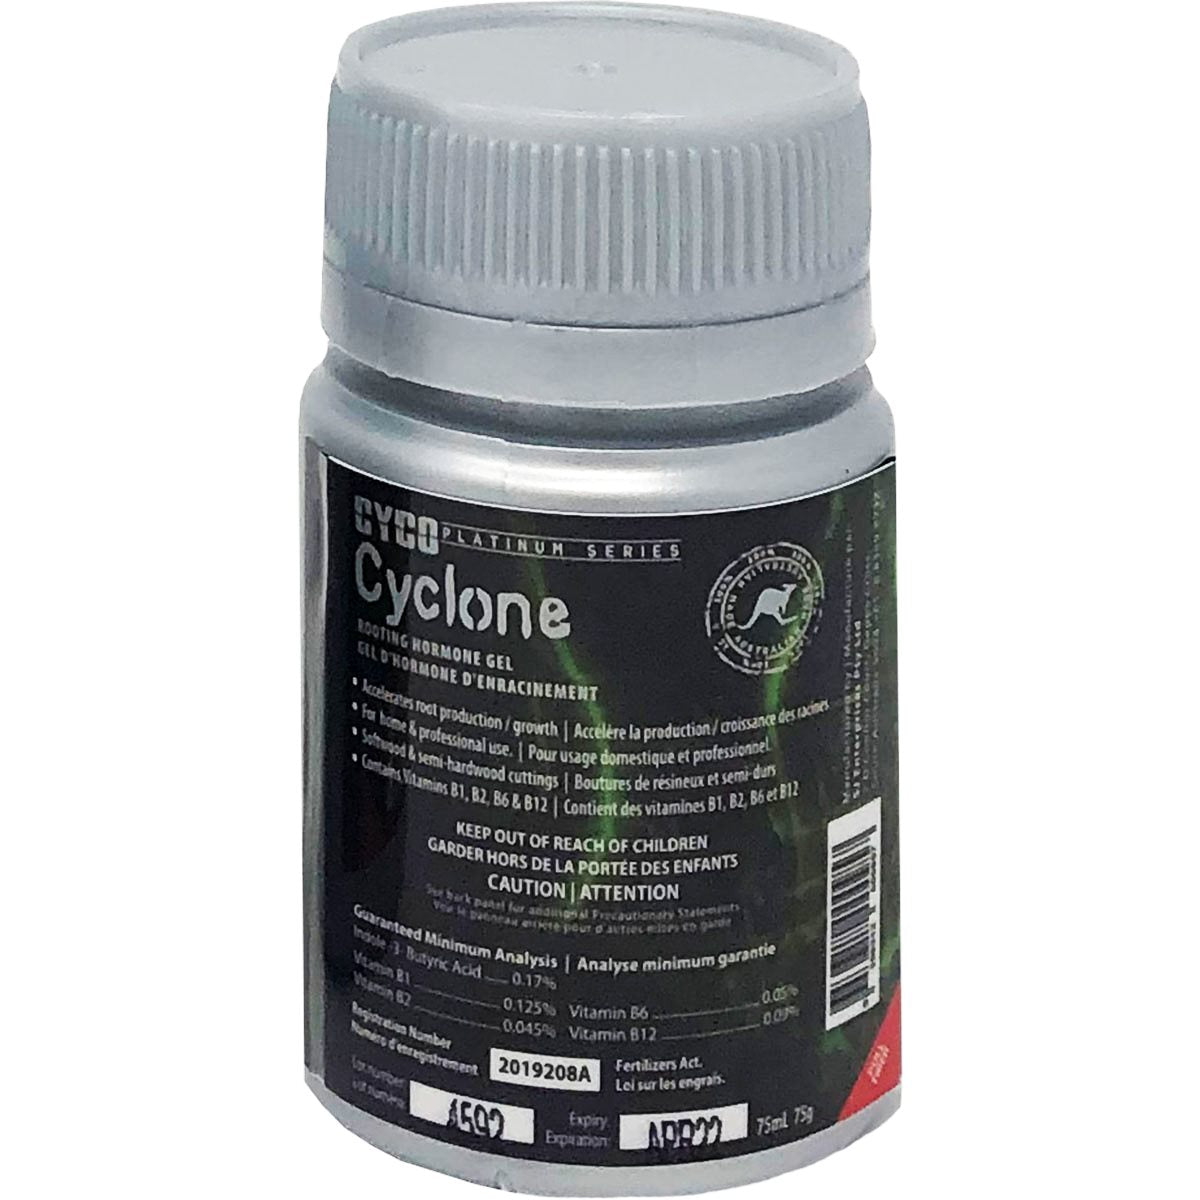 Product Secondary Image:Cyco Cyclone 250ml